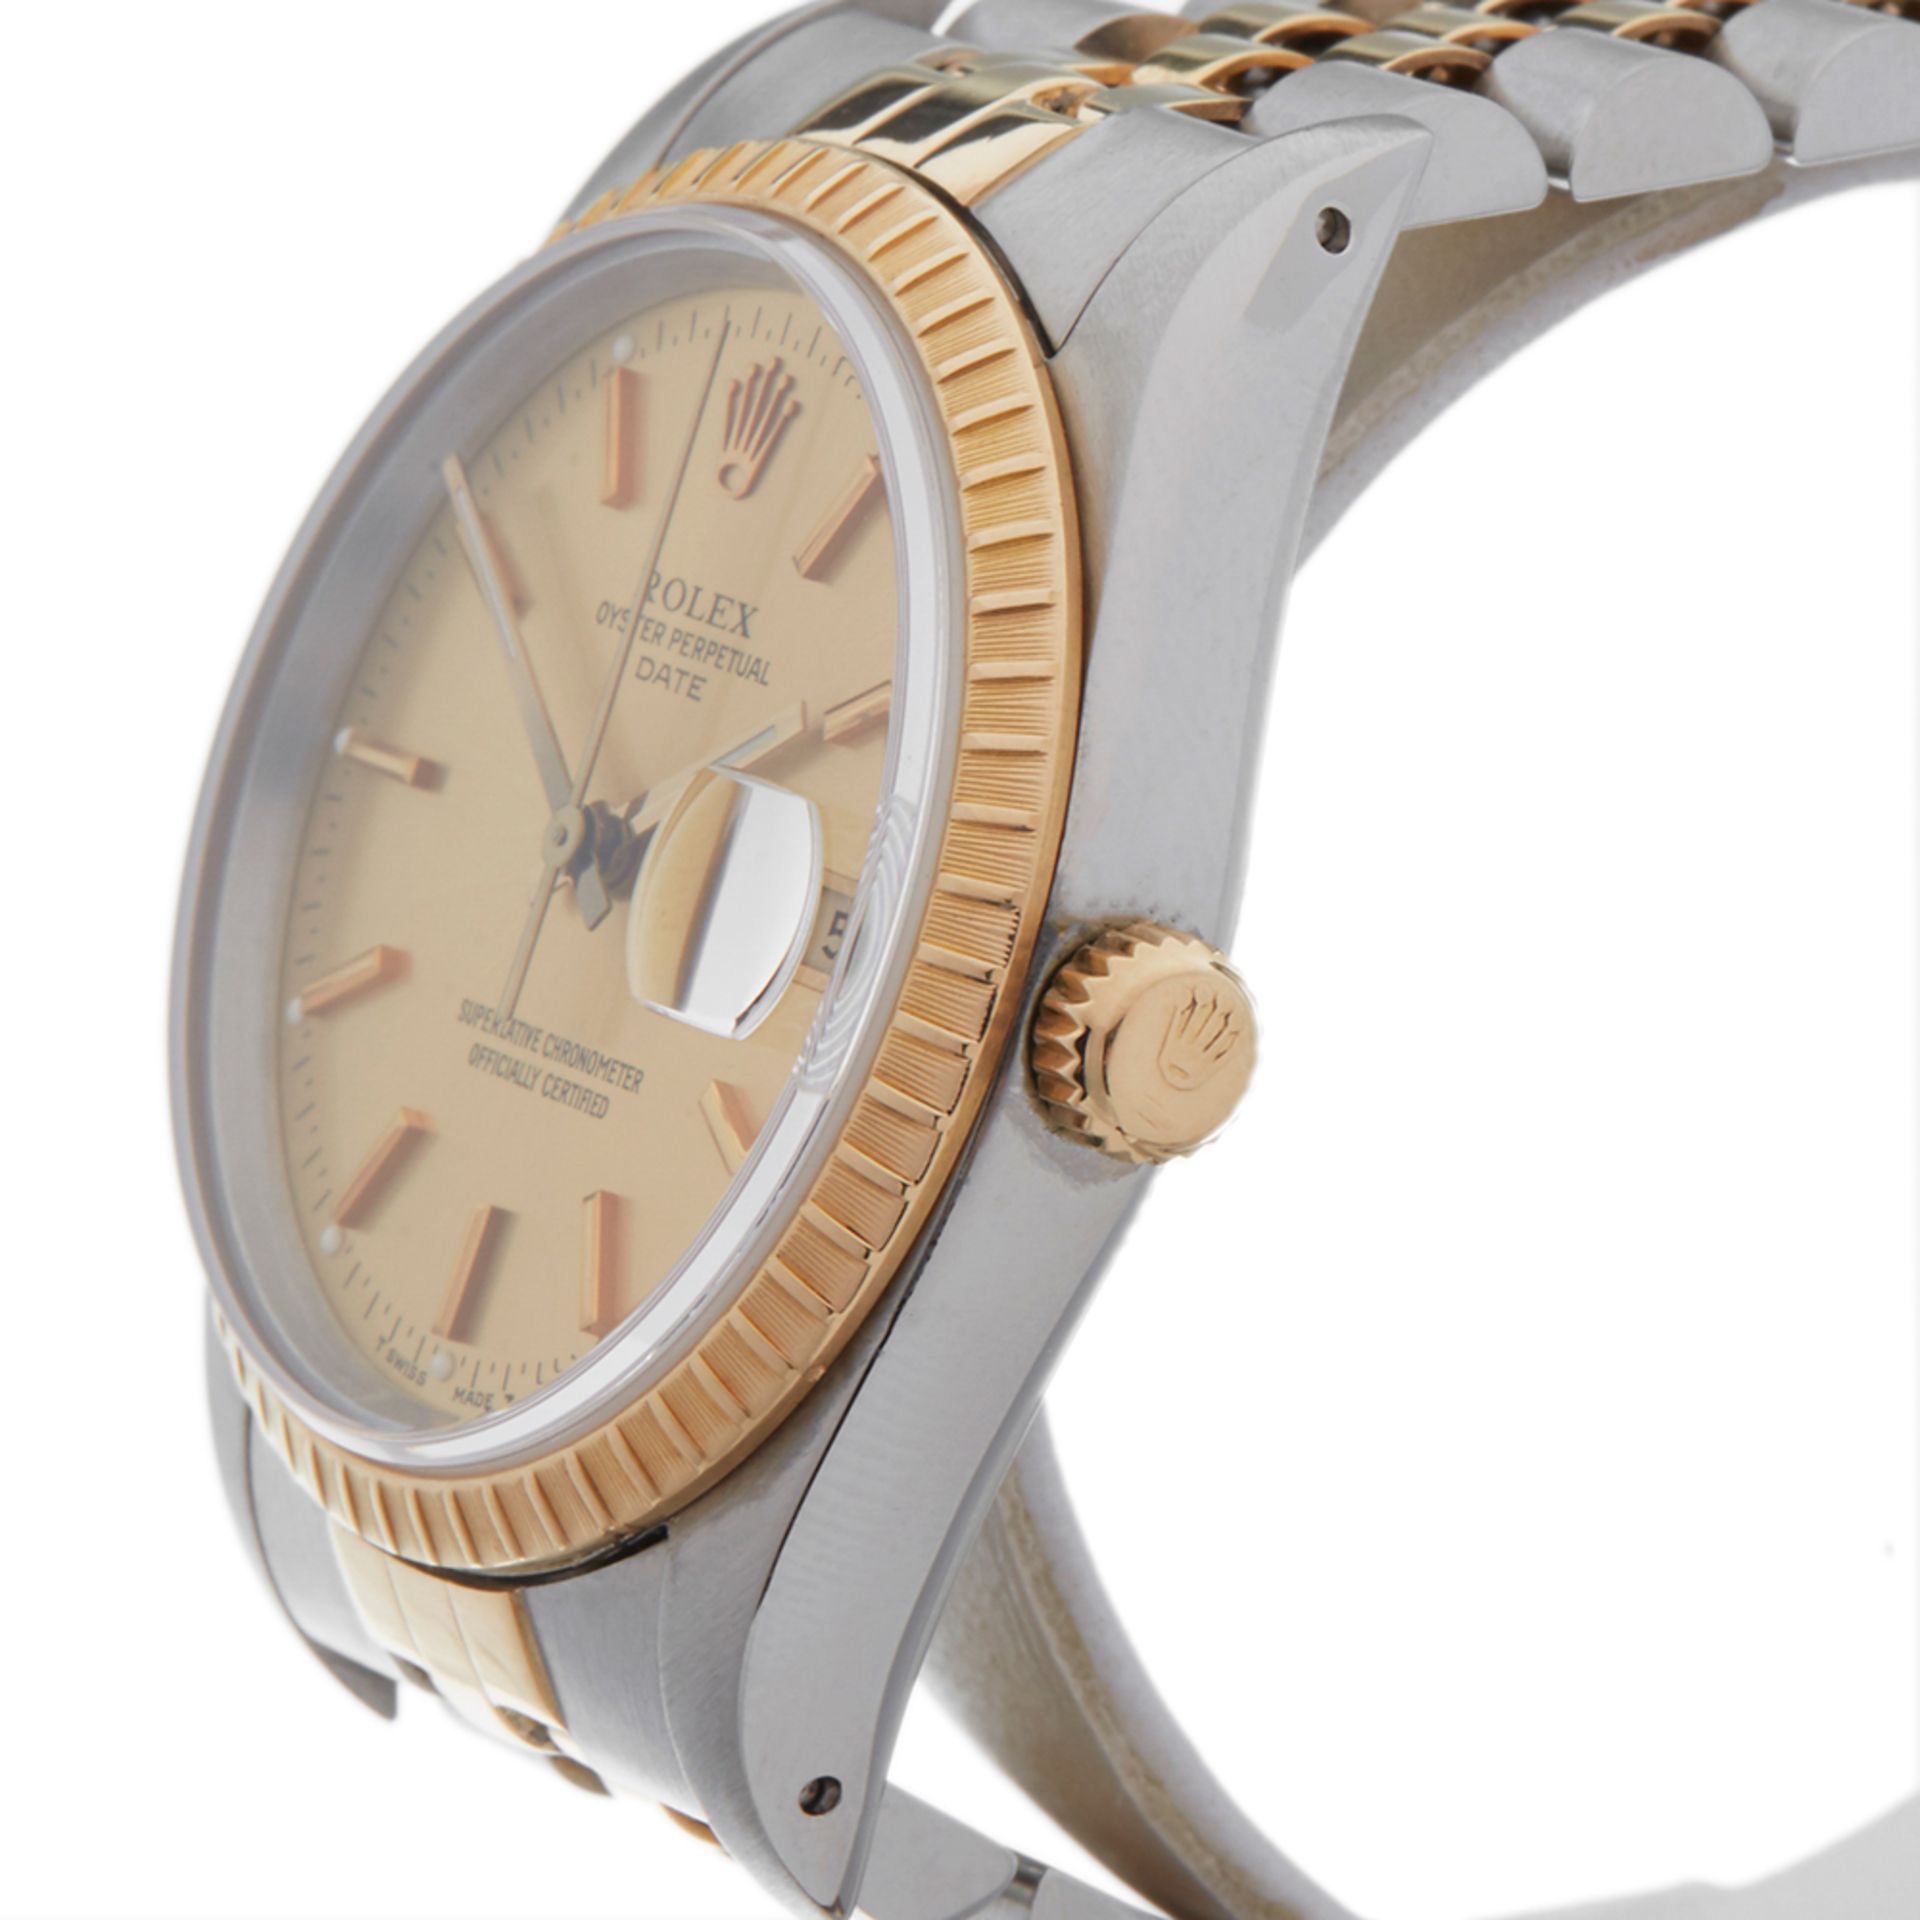 Oyster Perpetual Date 36mm Stainless Steel & 18k Yellow Gold 15233 - Image 4 of 8